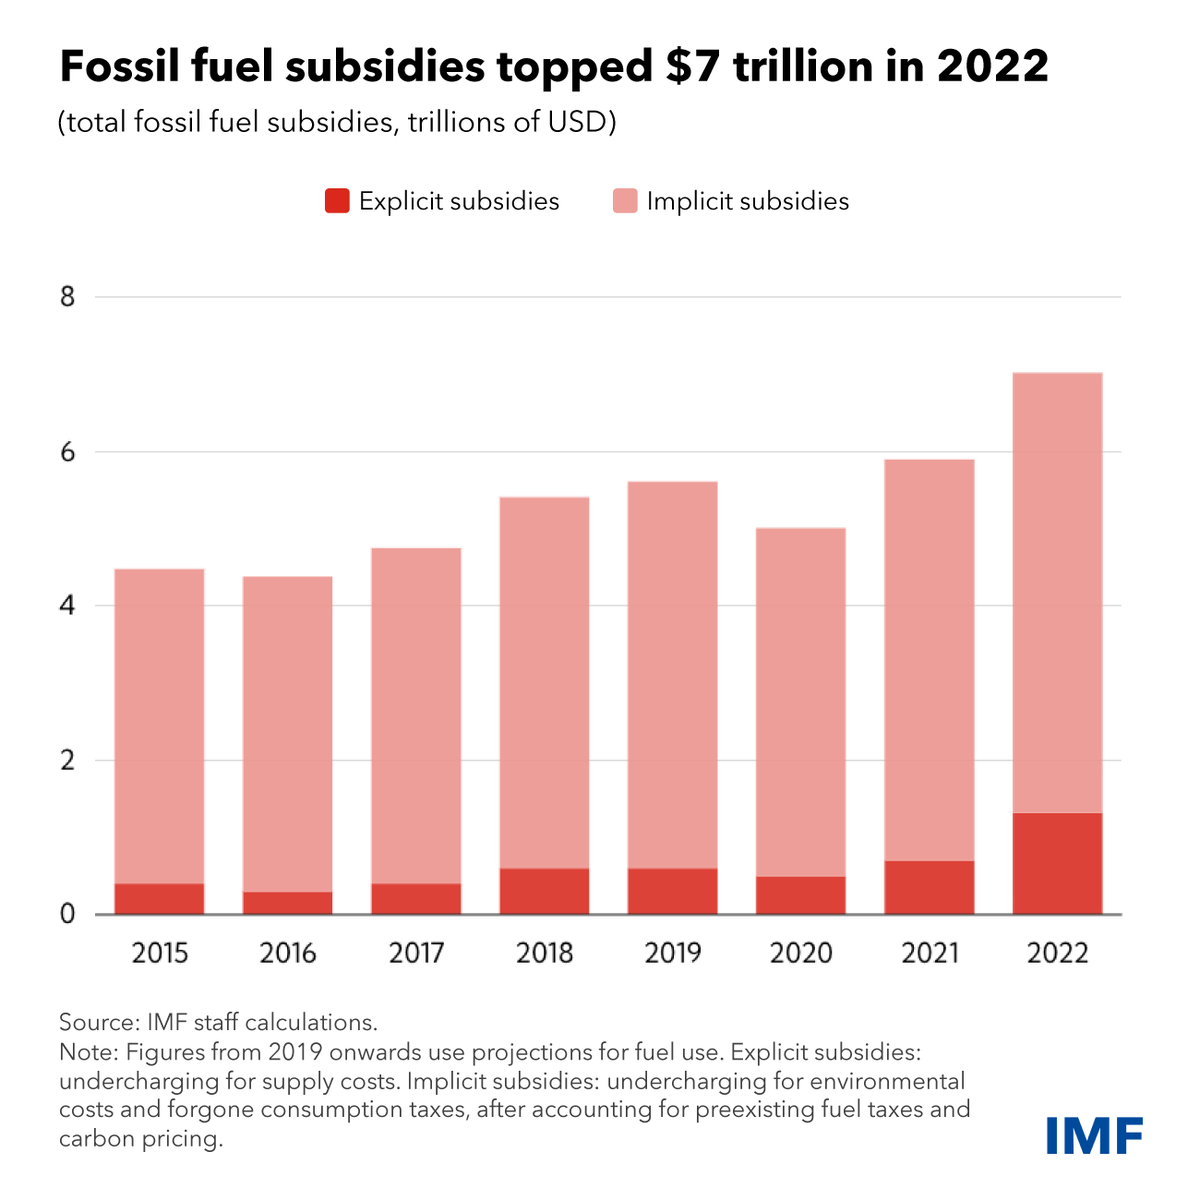 Fossil fuel subsidies surged to a record $7 trillion in 2022. With global temperatures rising to unprecedented levels, subsidies should be scaled back to help slow climate change. More in our blog. imf.org/en/Blogs/Artic…